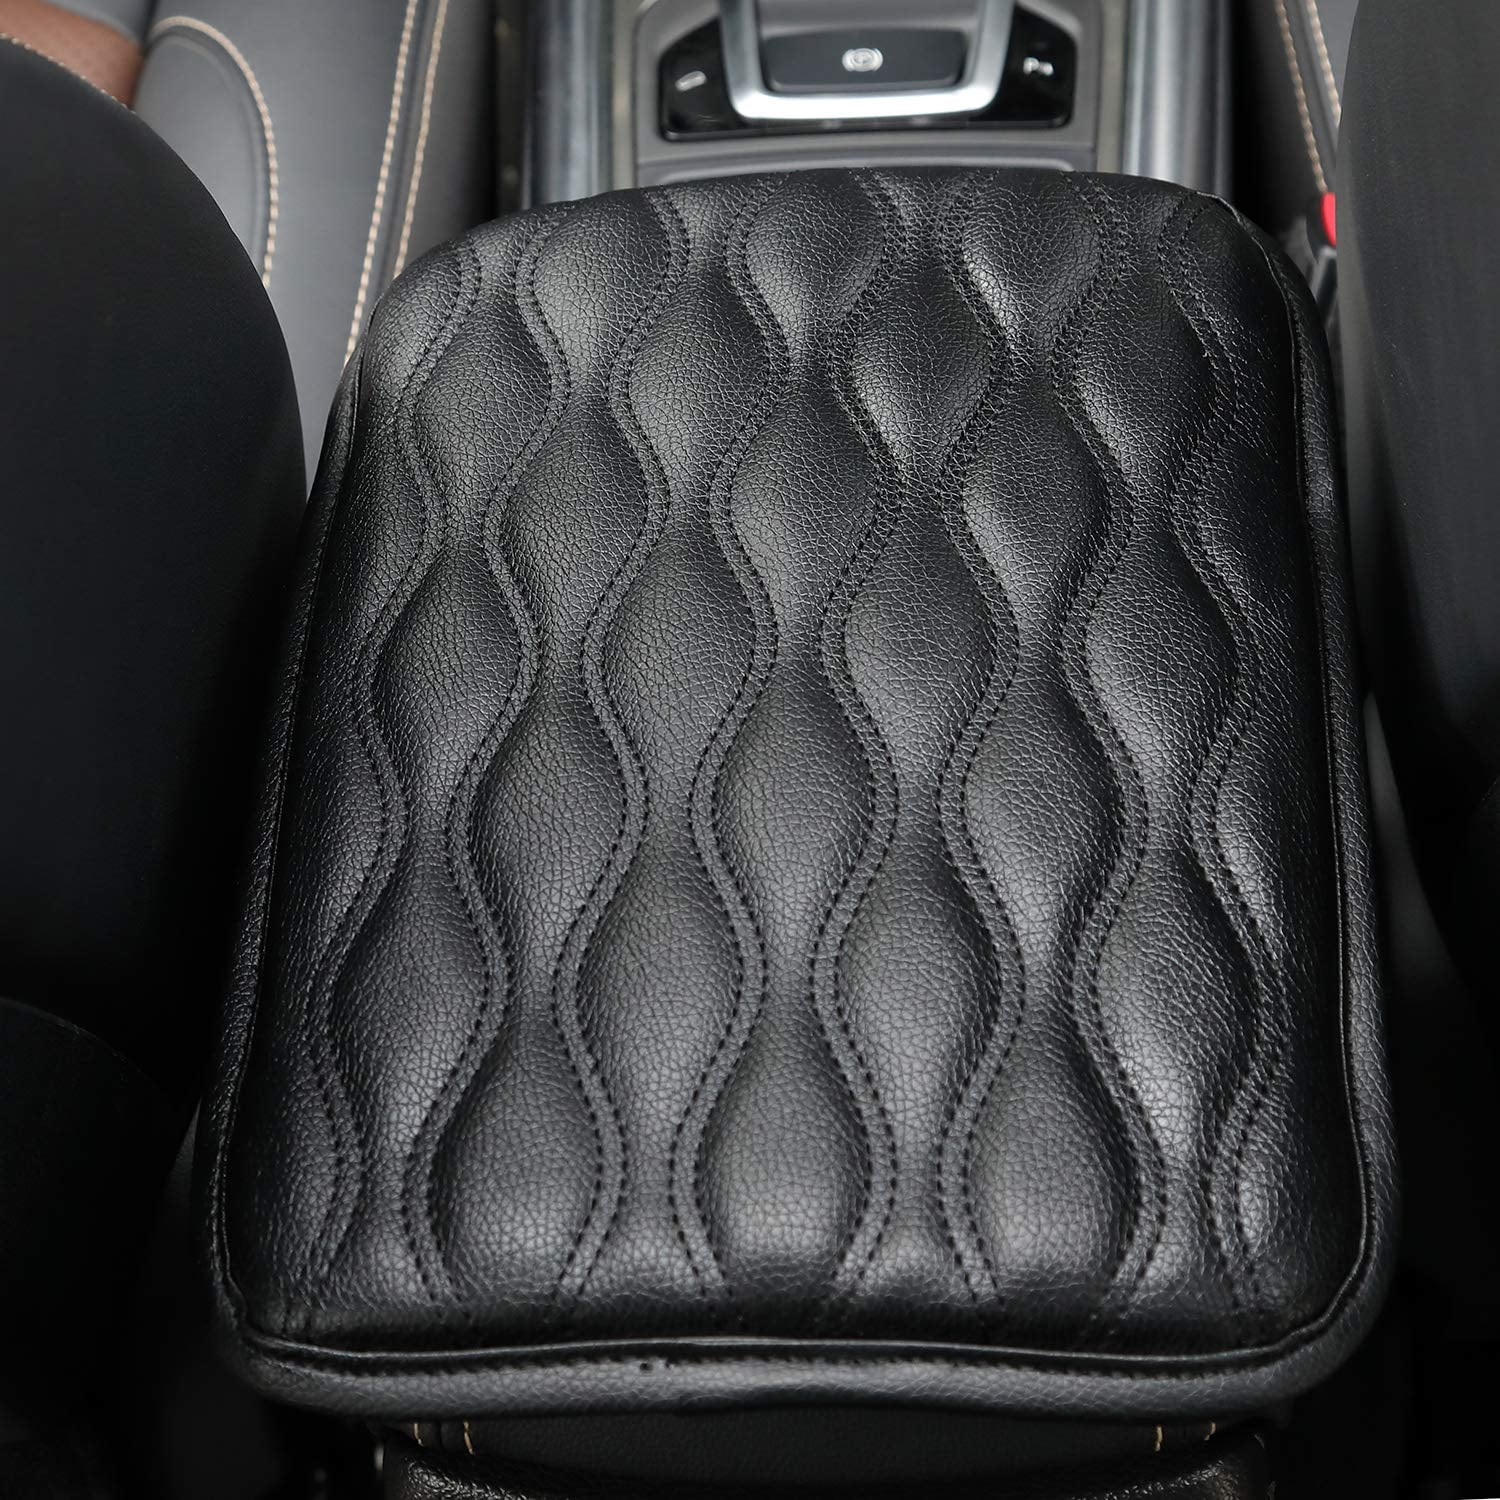 PU Leather Universal Auto Armrest Cushion Pad Waterproof Center Console Cover Armrest Protector Perfect for Most Vehicle SUV Truck Meserparts Auto Center Console Pad